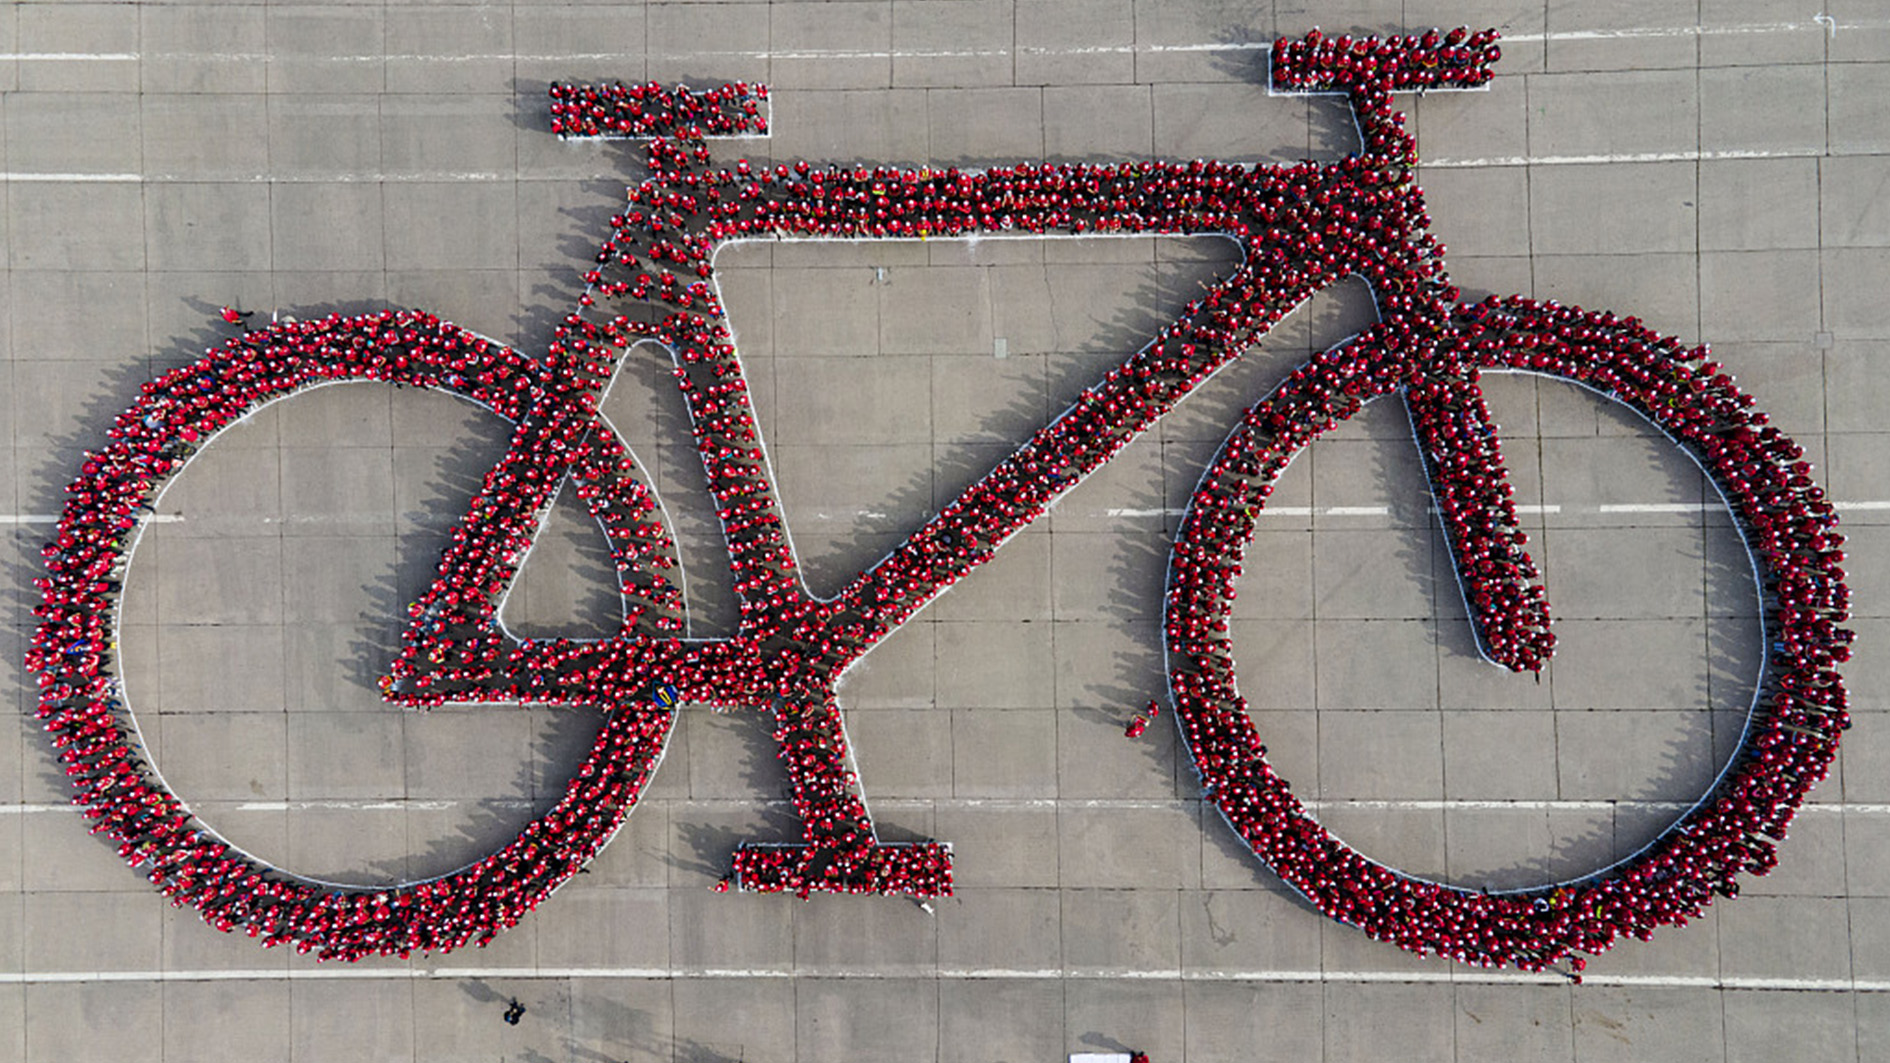 Chileans aim to create the world’s largest human bicycle